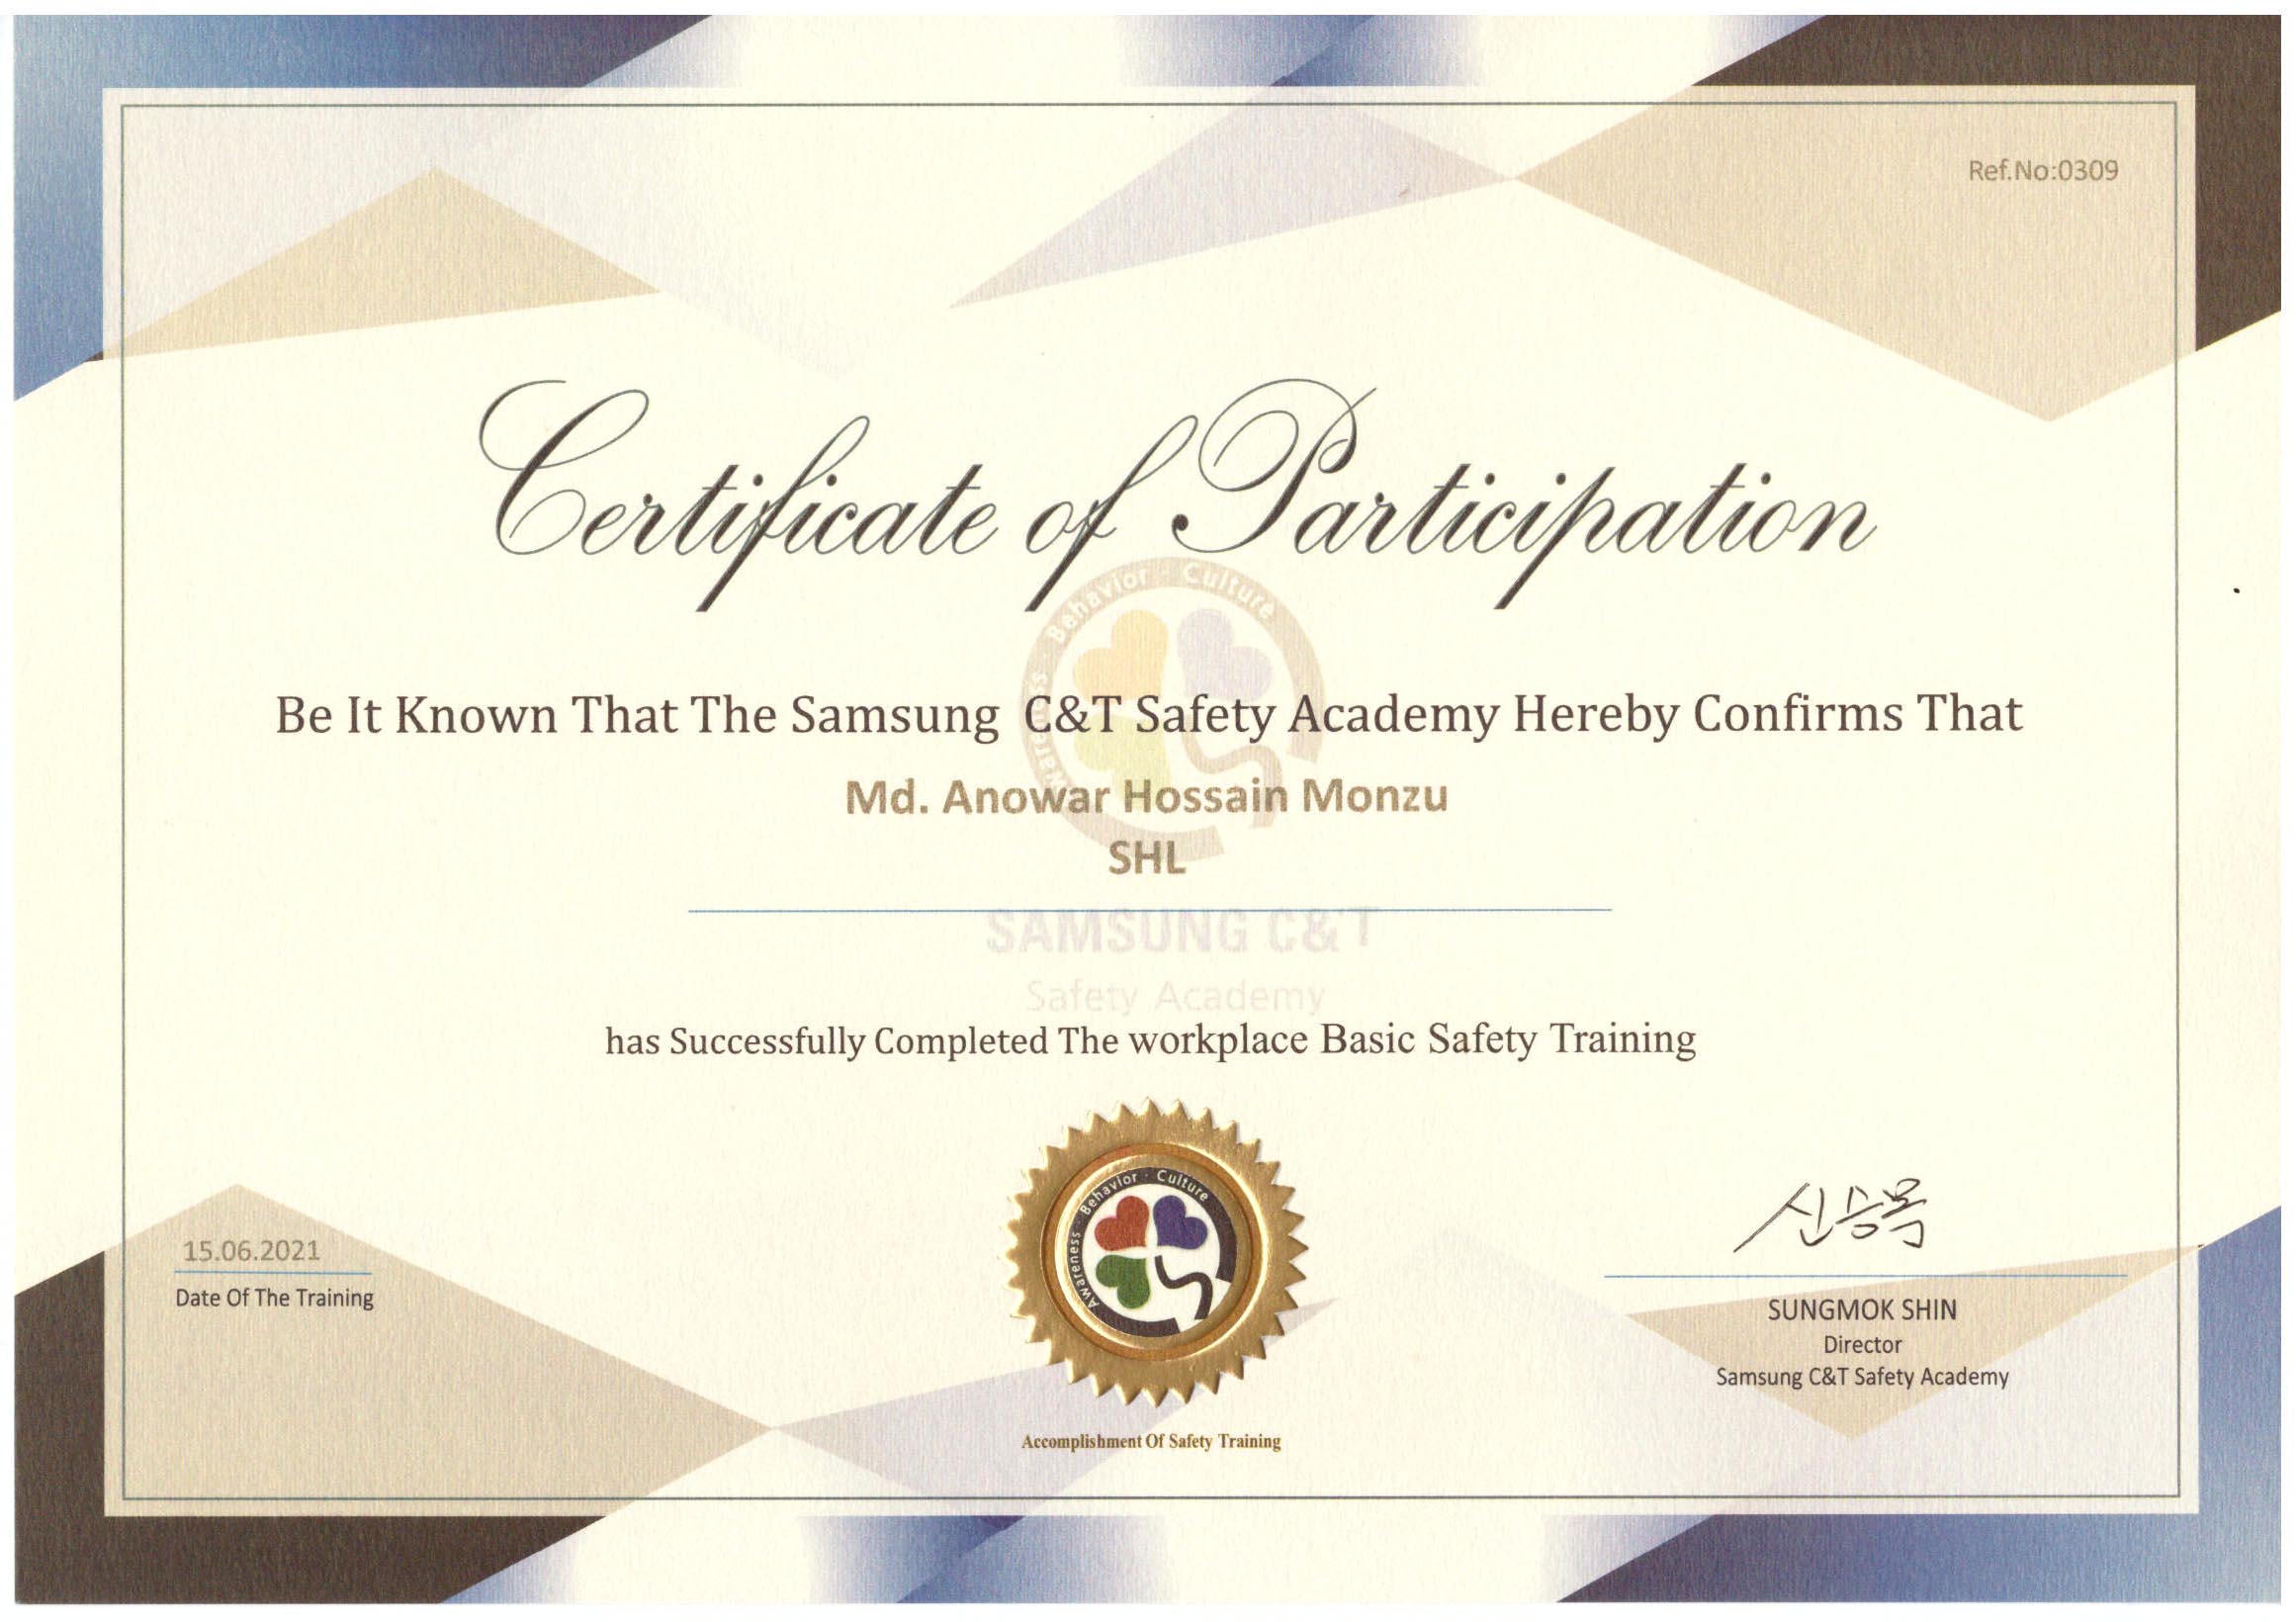 Certificate of Participation 